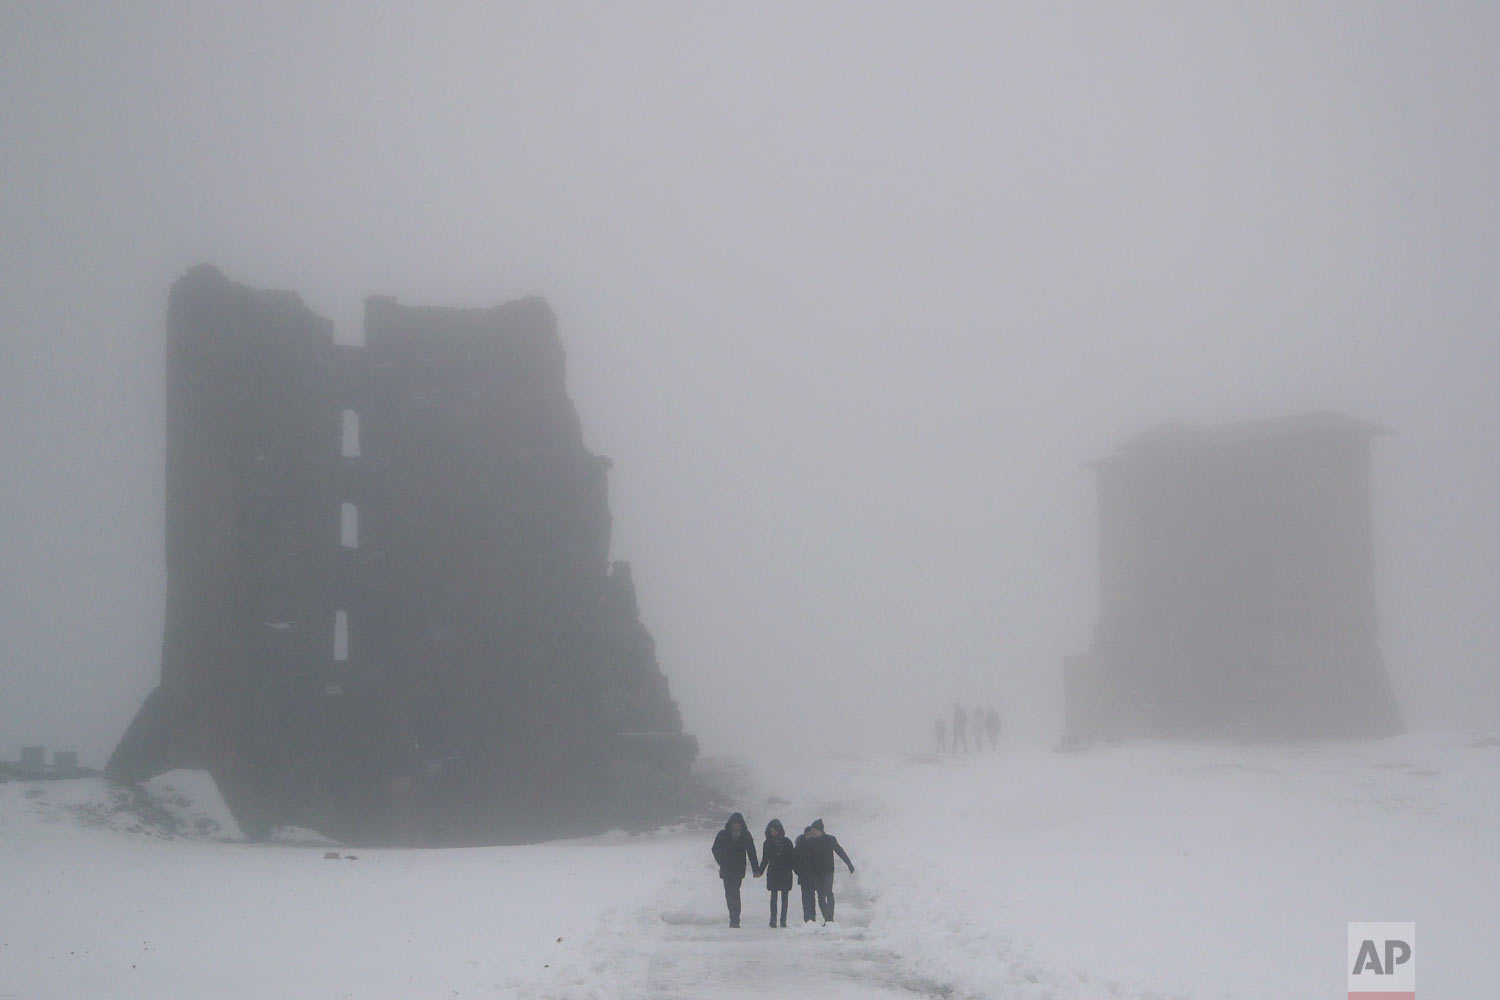  People walk past the ruins of a medieval castle on a foggy day in the Belarusian town of Novogrudok, 150 kilometers (93 miles) west of the capital Minsk, Sunday, Dec. 30, 2018, as temperature hovered around 2 degrees Celsius (35 Fahrenheit). (AP Pho